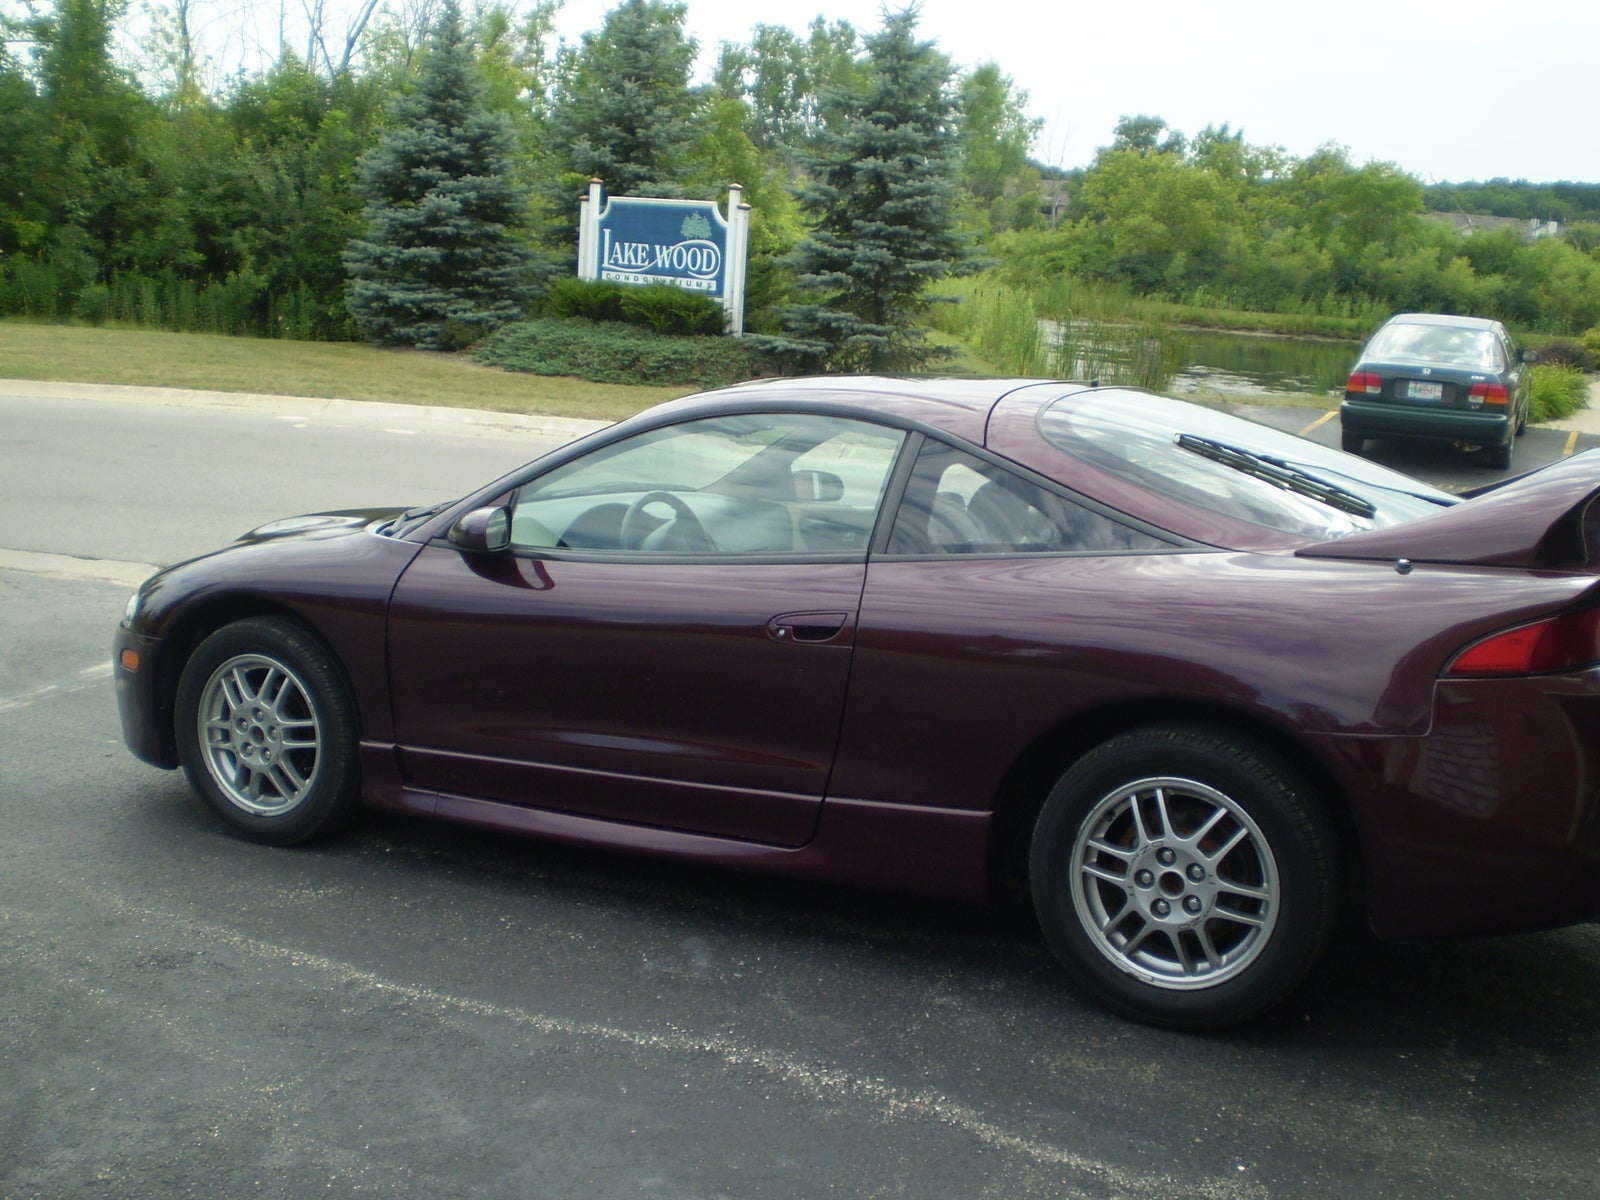 Mitsubishi Eclipse Questions - car problems: engine died and so the the  power steering... any suggest... - CarGurus